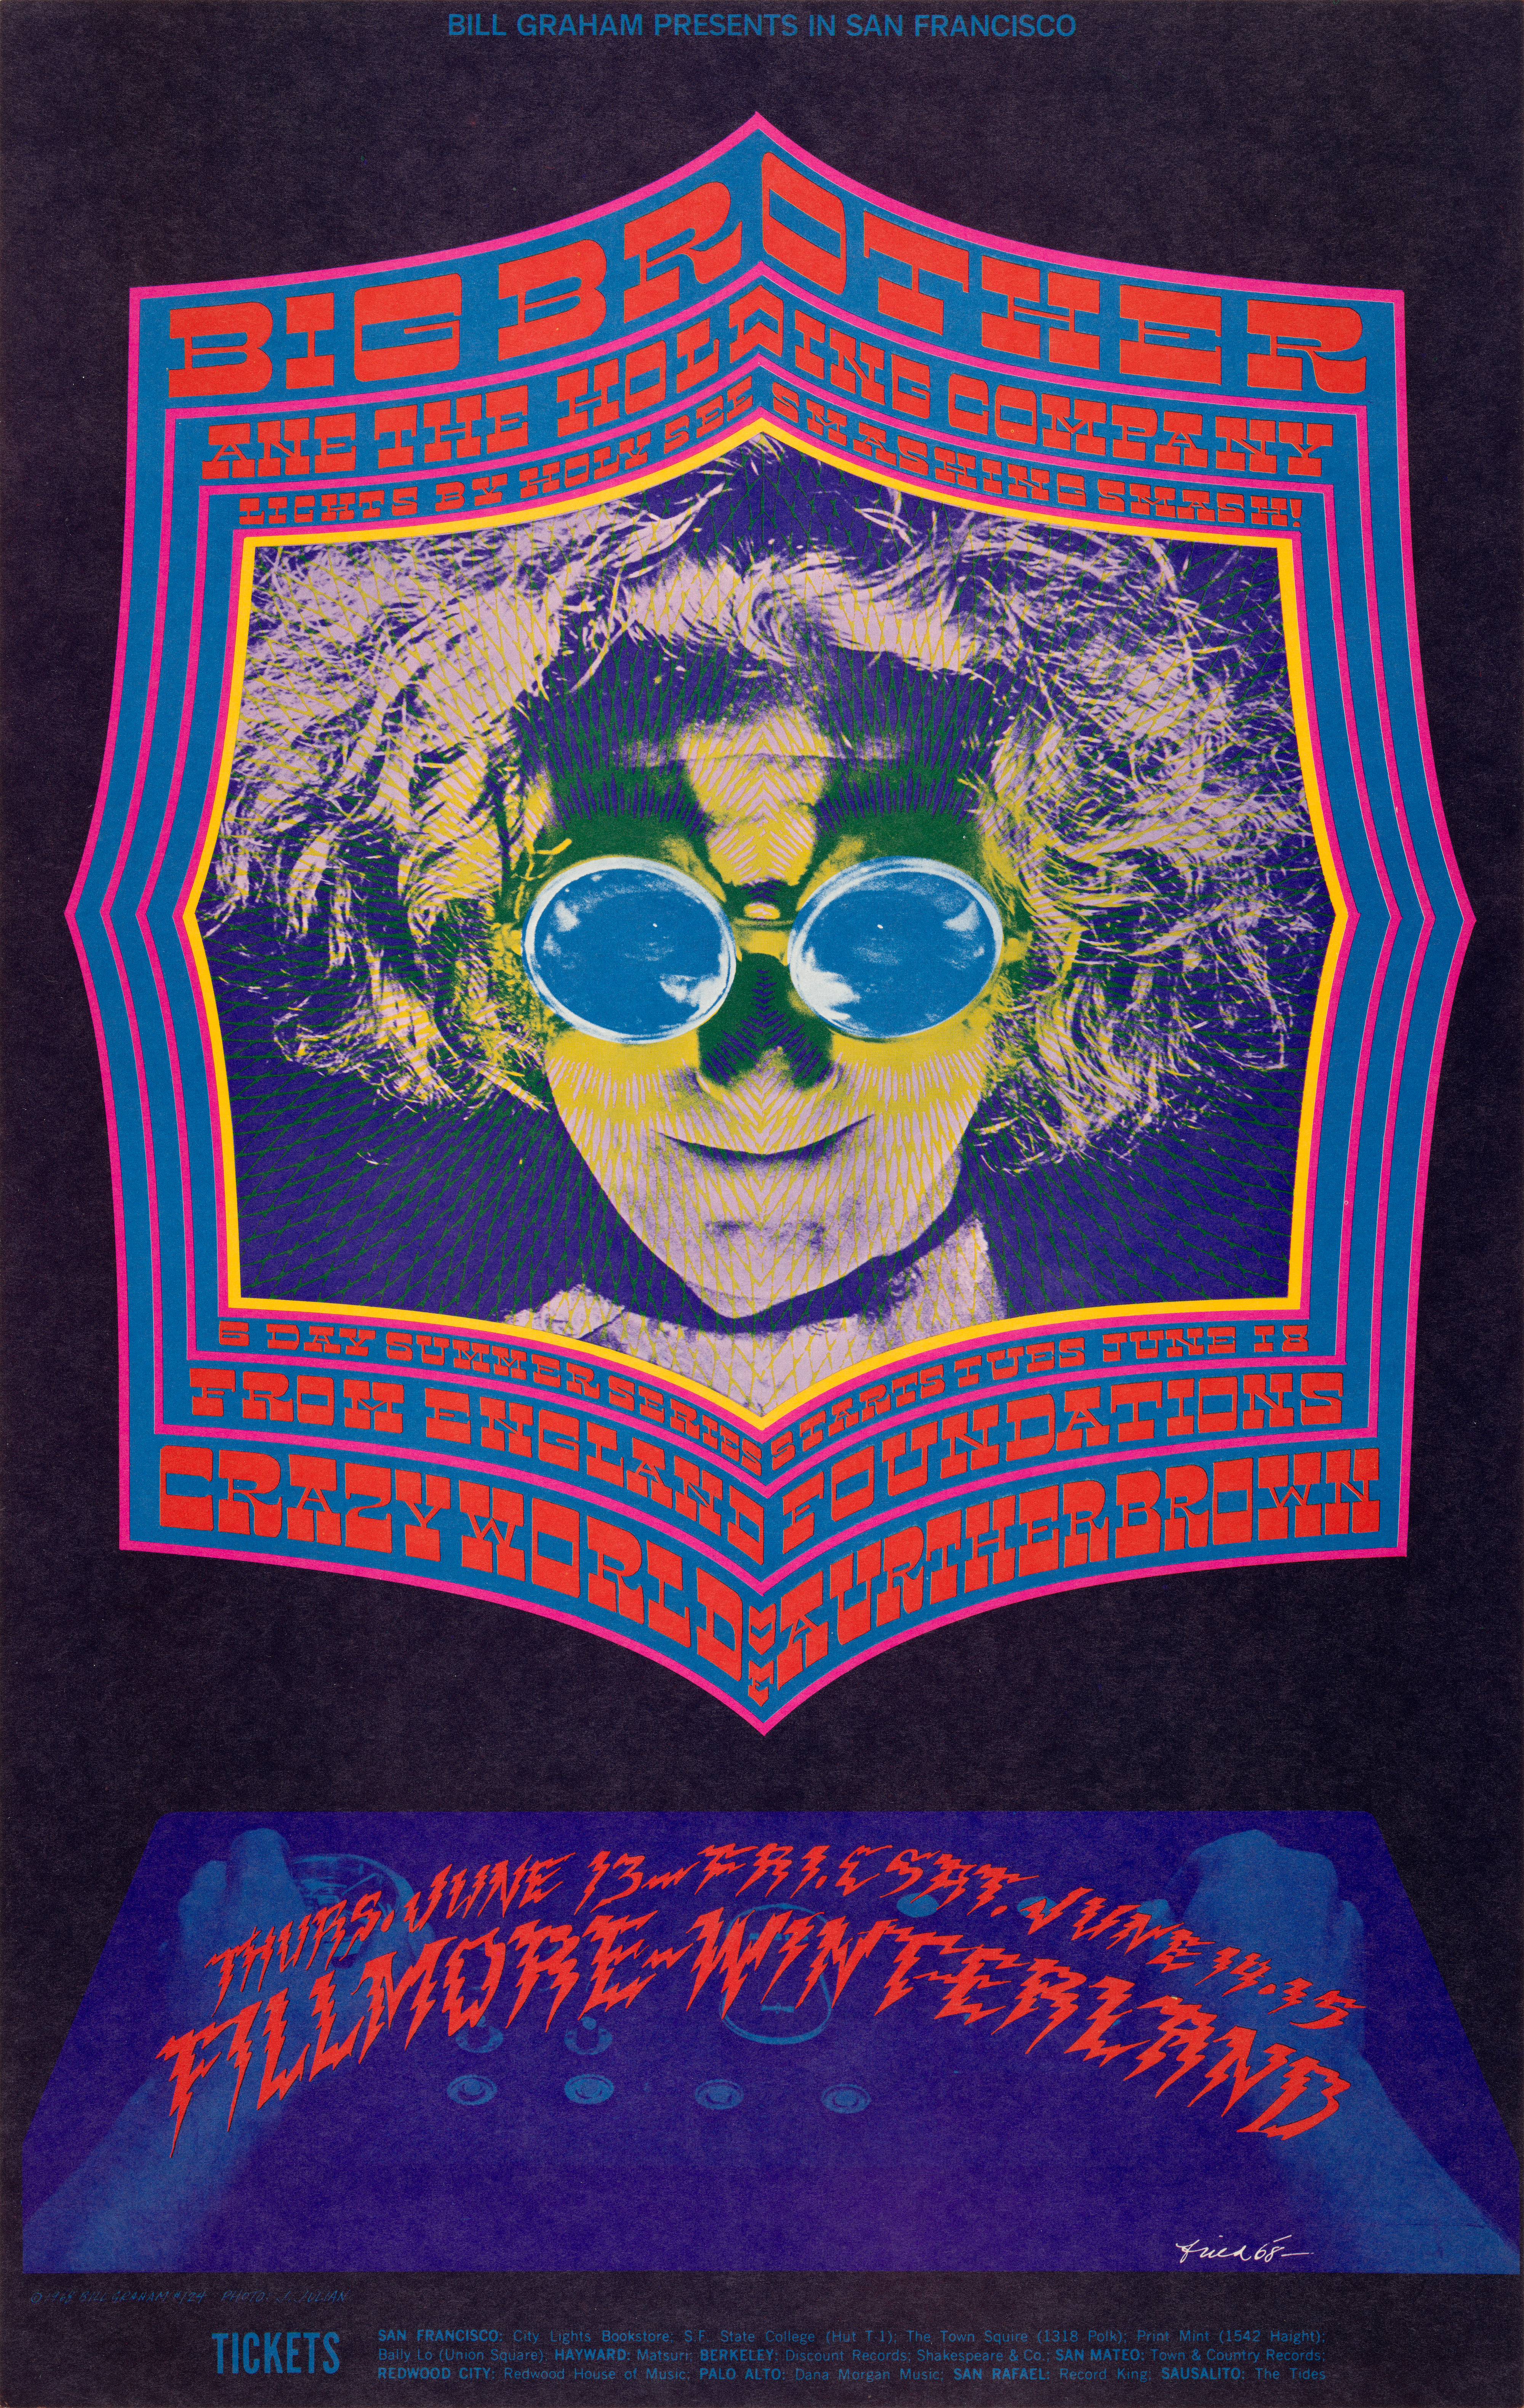 Big Brother and the Holding Company, The Crazy World of Arthur Brown, Fillmore Auditorium, June 13, 1968 and Winterland, June 14-15, 1968